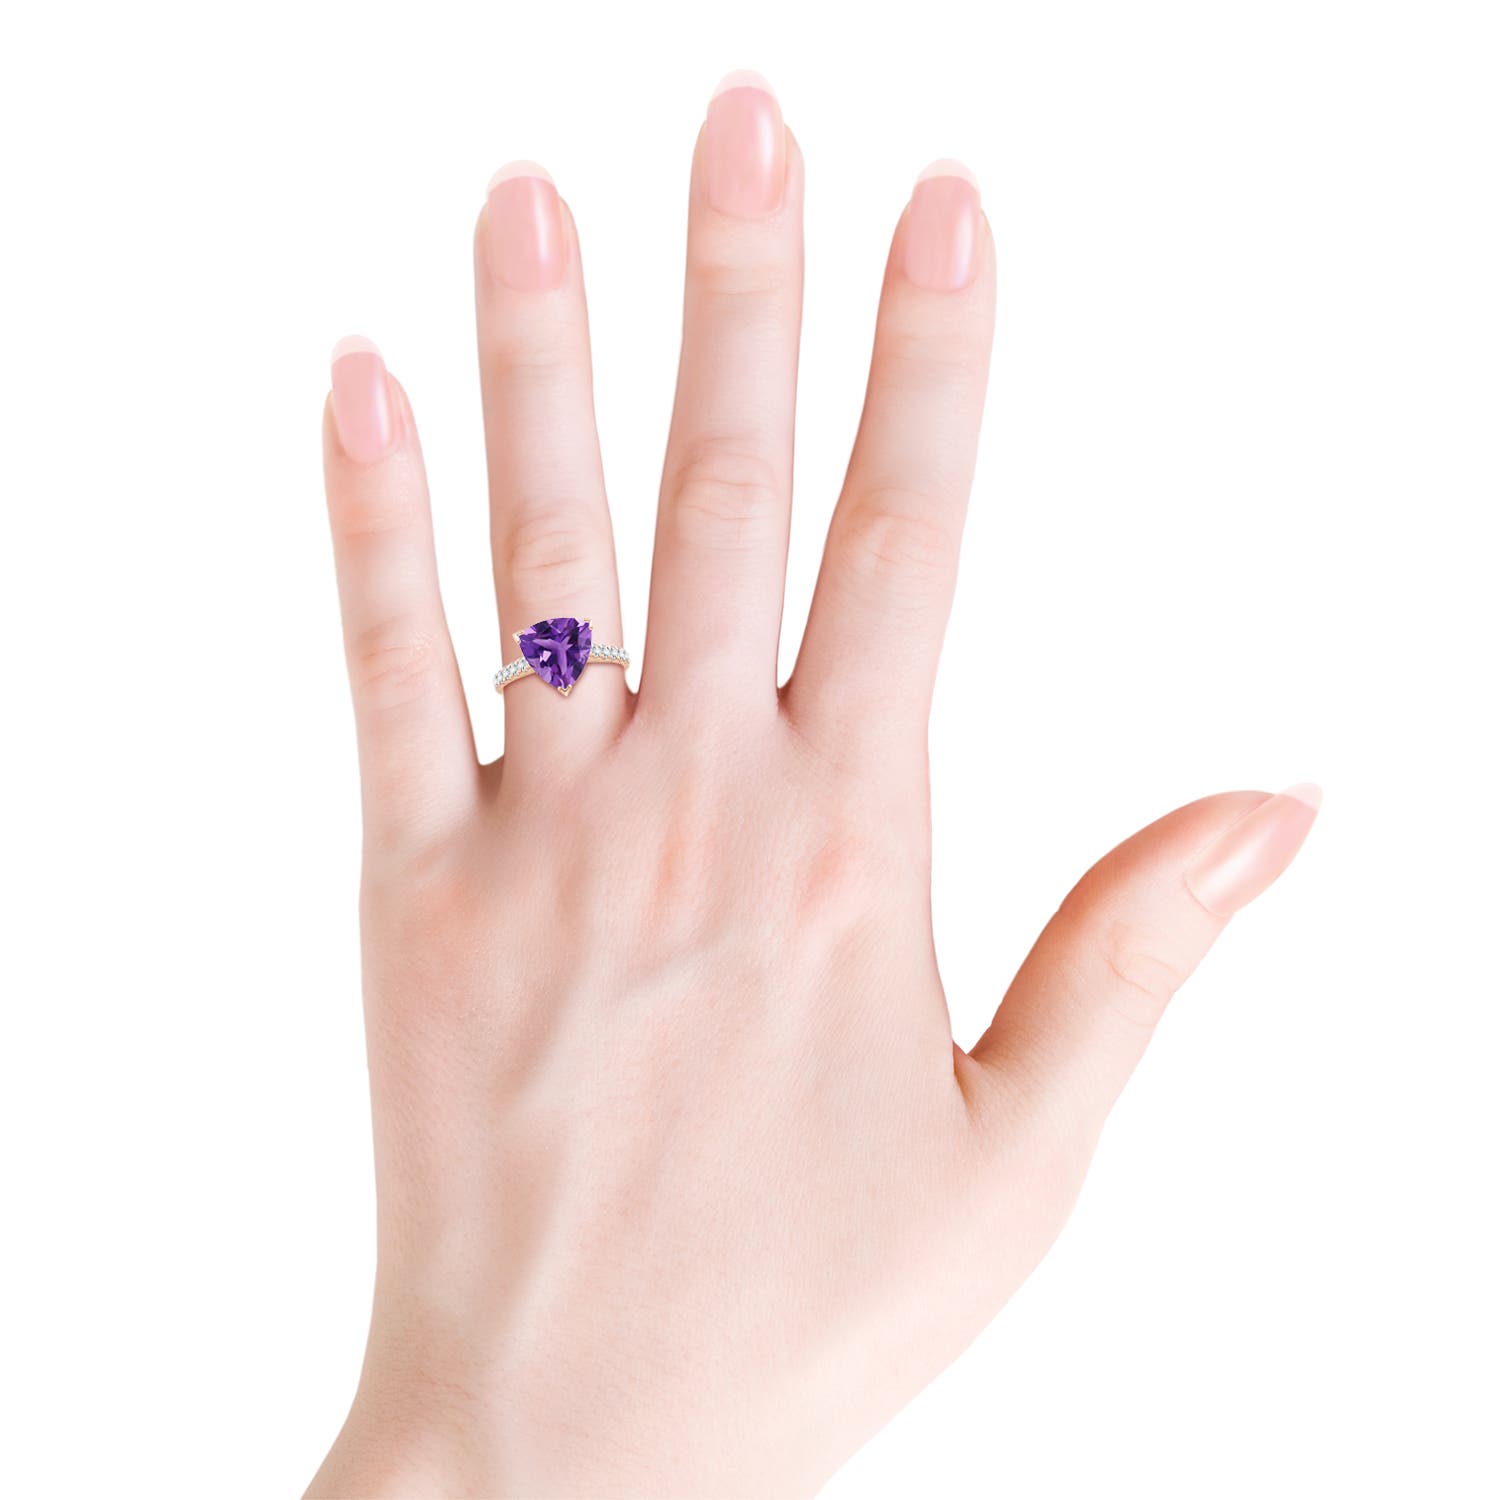 AAA - Amethyst / 2.95 CT / 14 KT Rose Gold